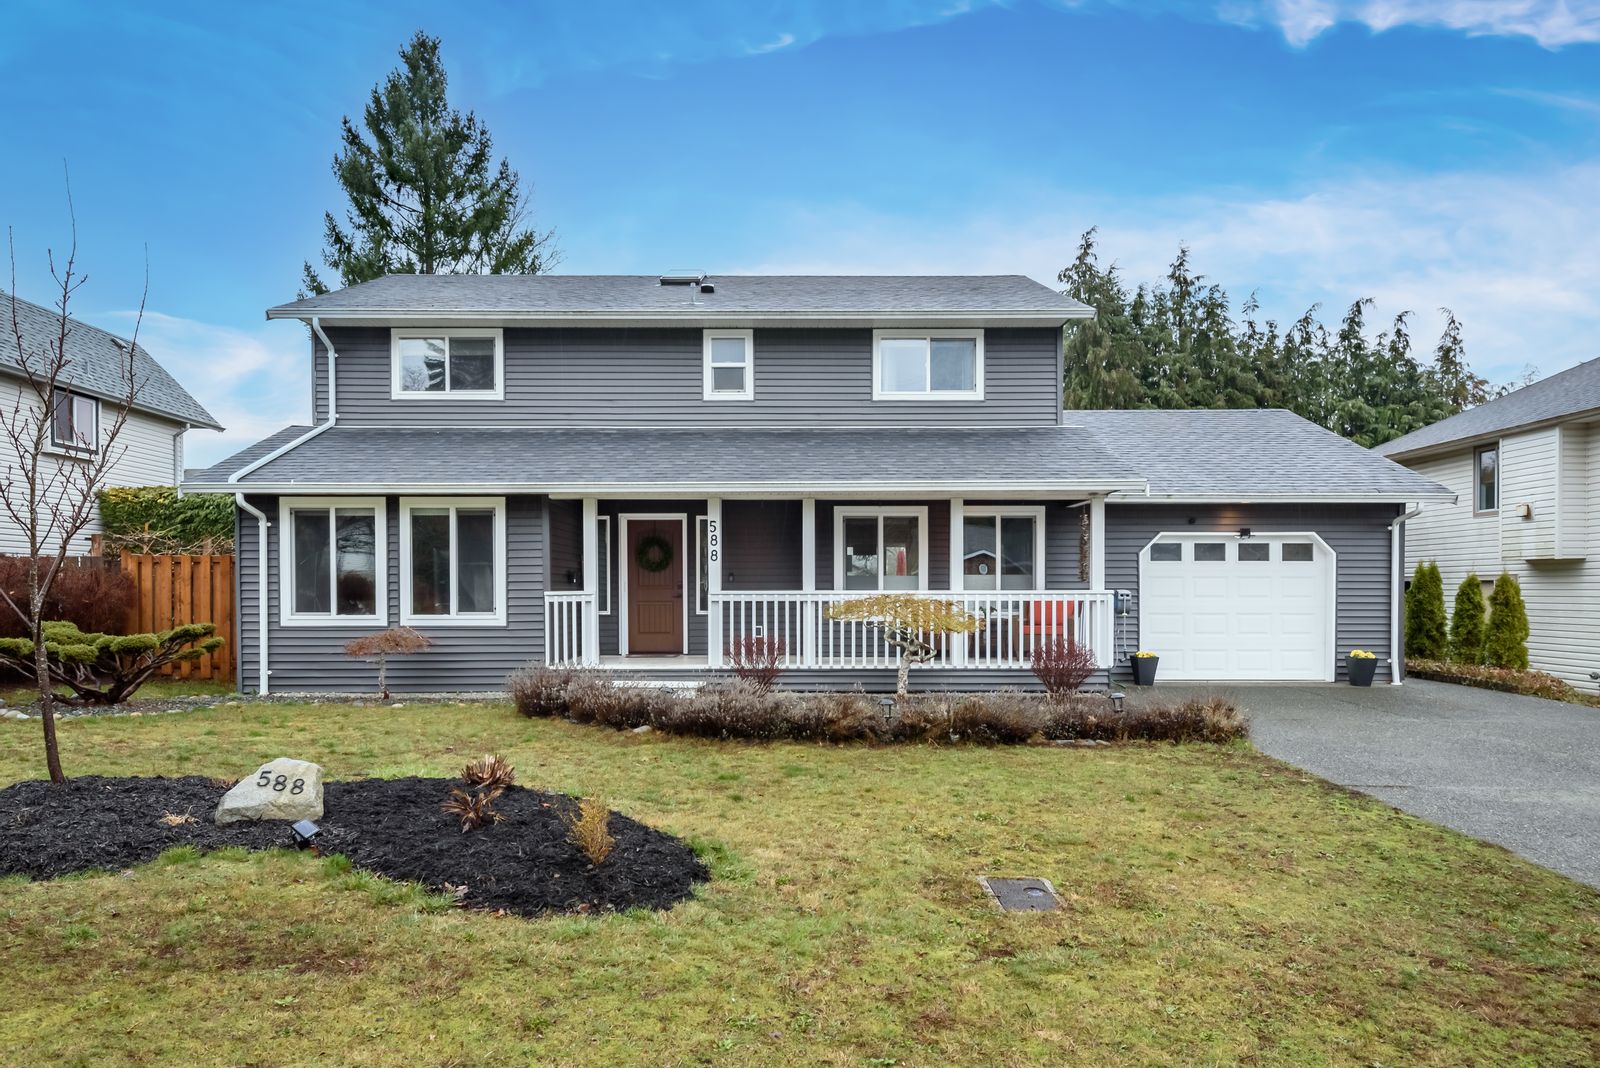 Take a tour of New Listing 588 Torrence, Comox, BC